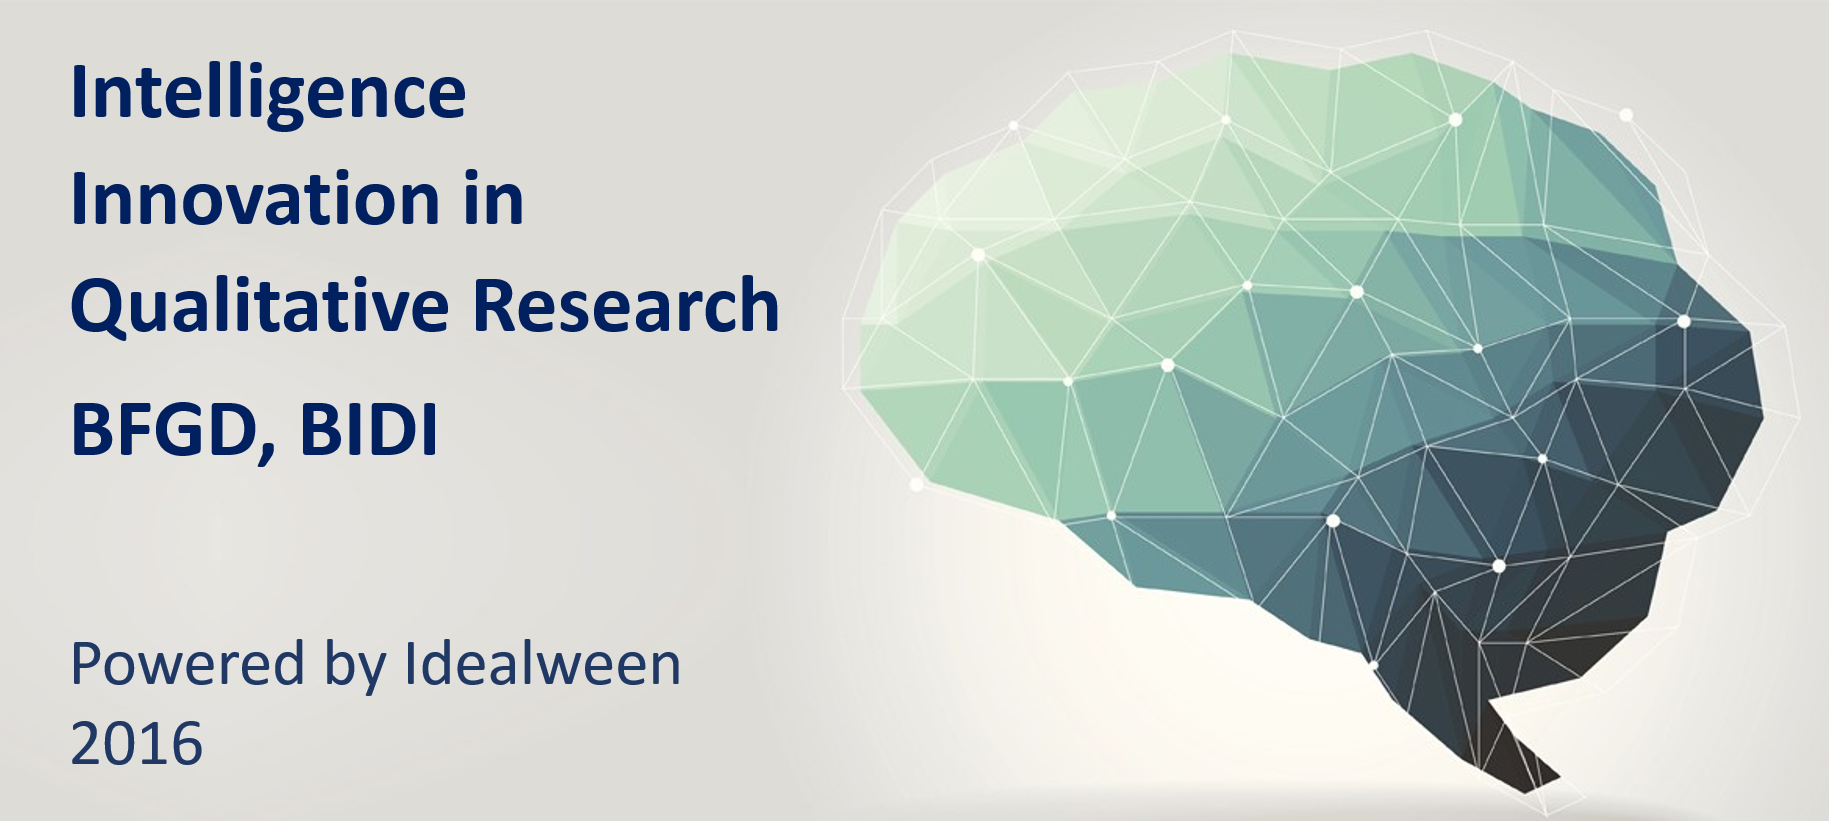 intelligence innovation in qualitative research